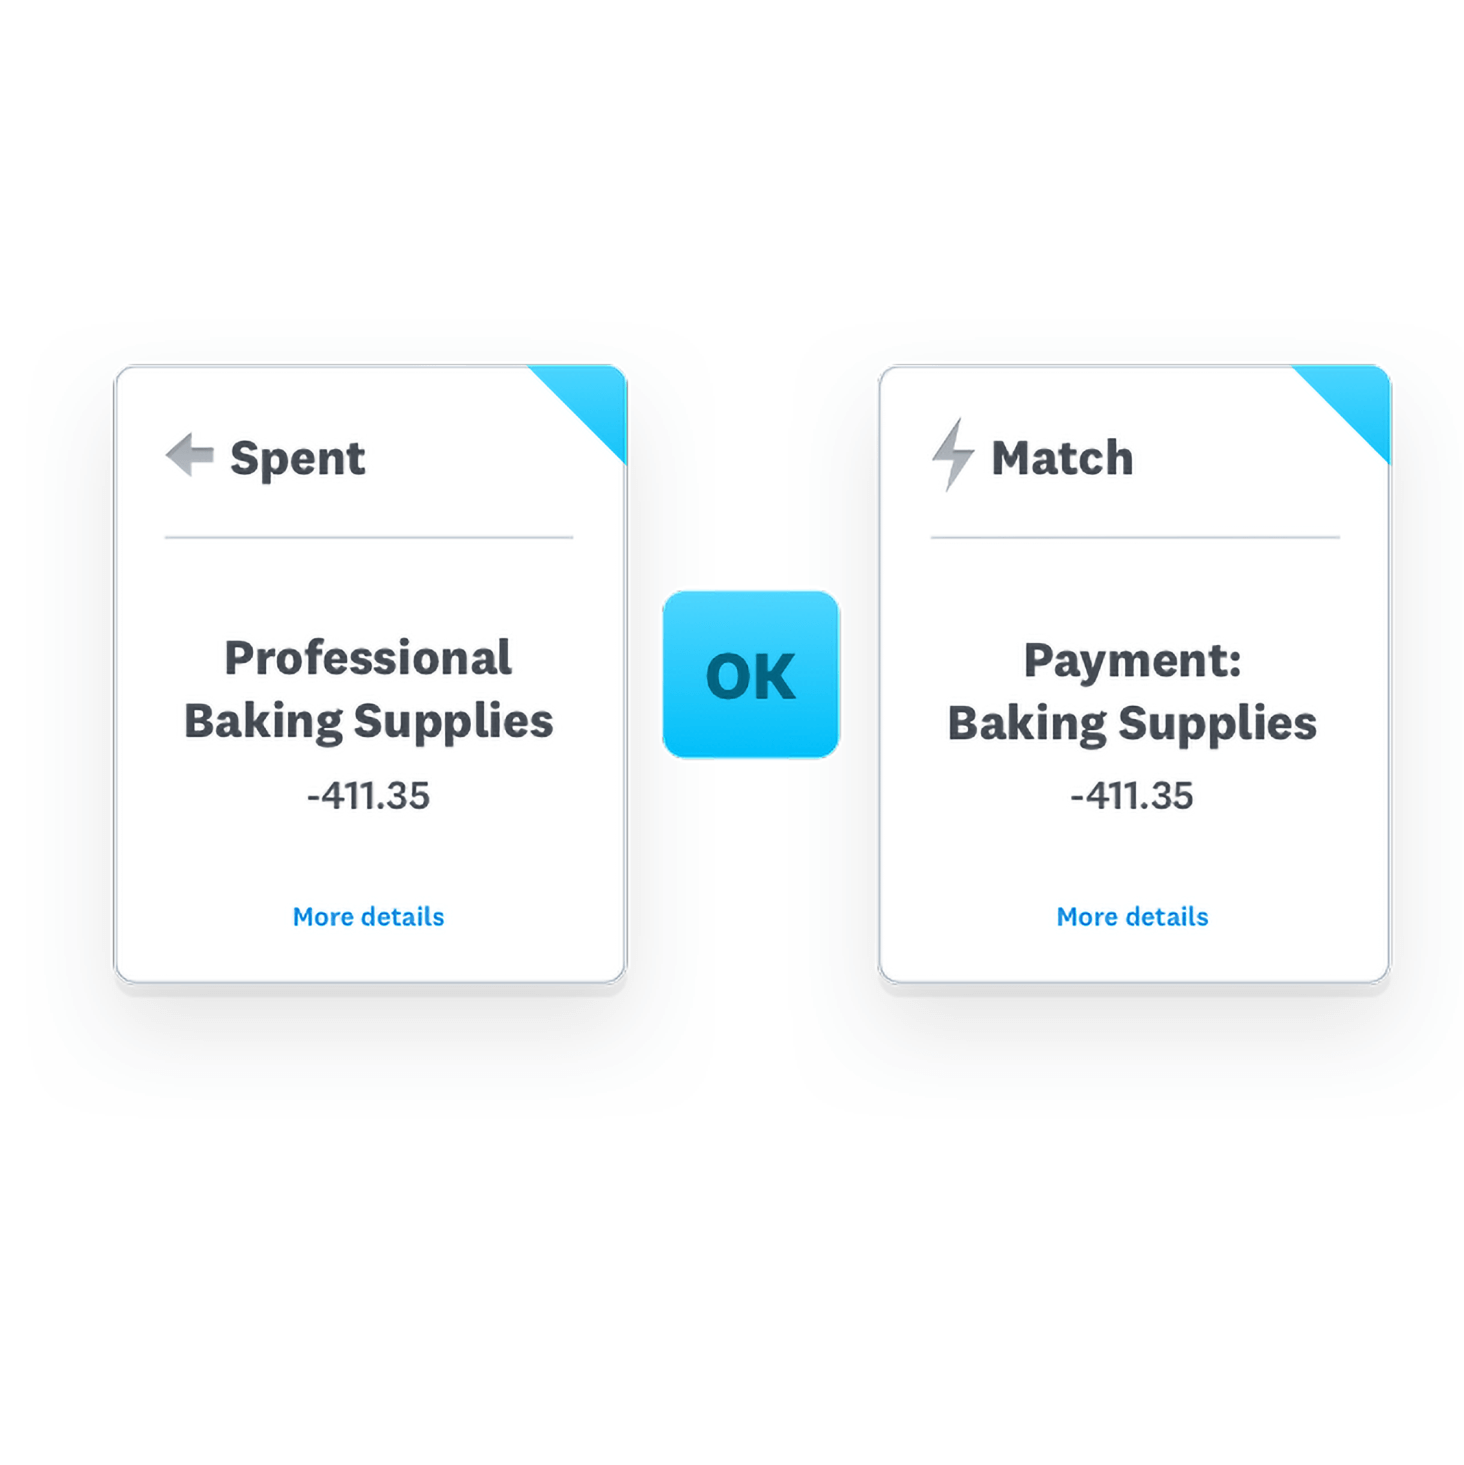 Xero’s online accounting software automatically approves and matches a bill and related payment.